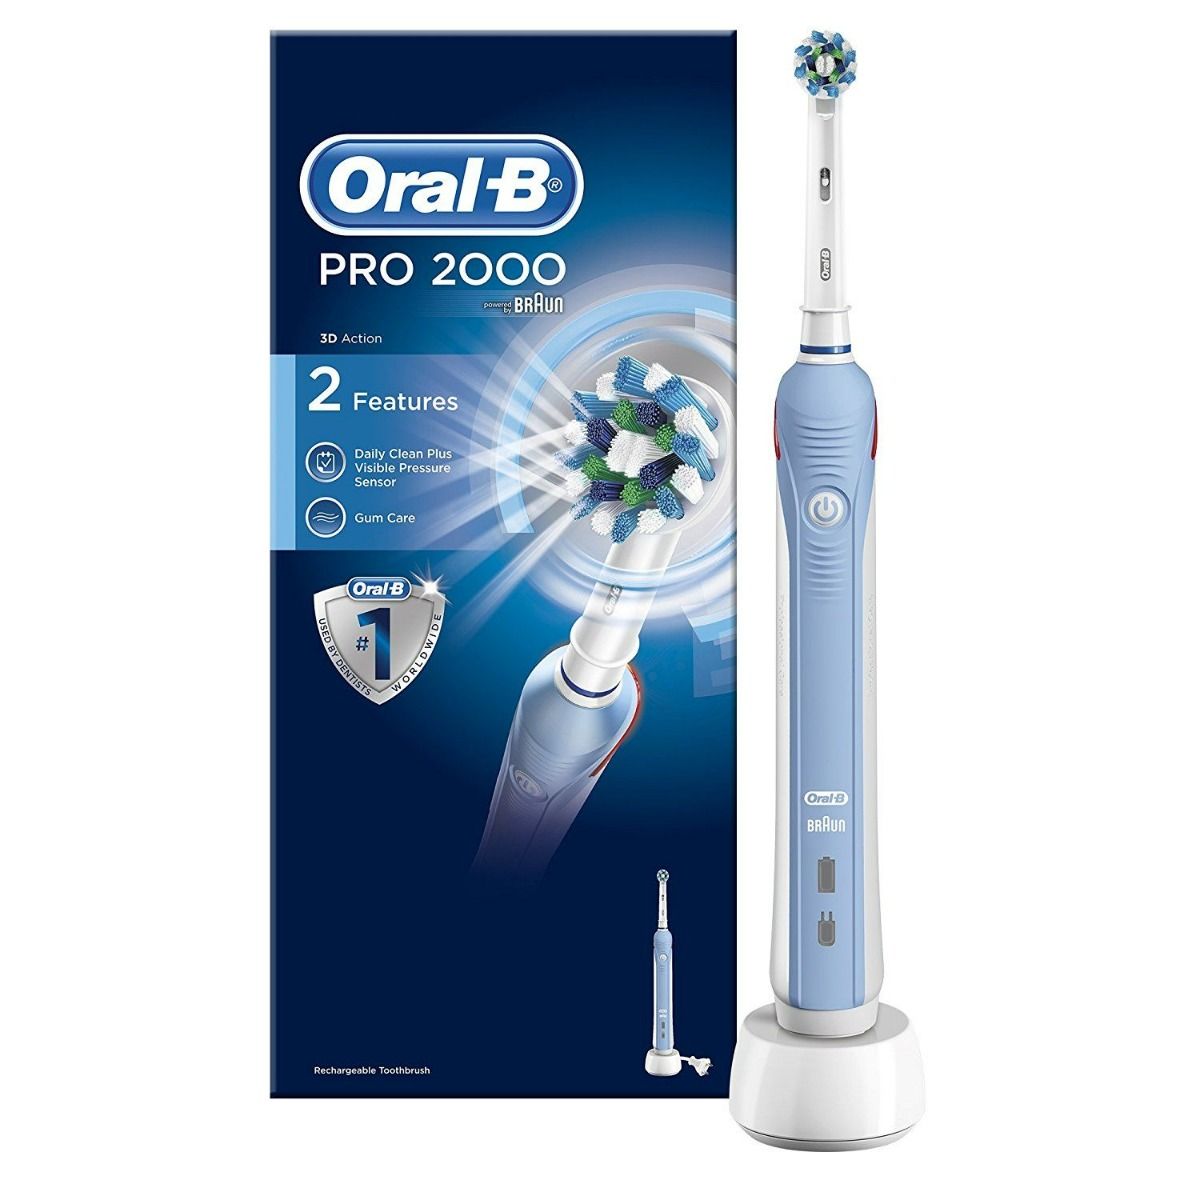 Oral-B Pro 2000 3D Action Rechargeable Toothbrush, 1 Count, Pack of 1 